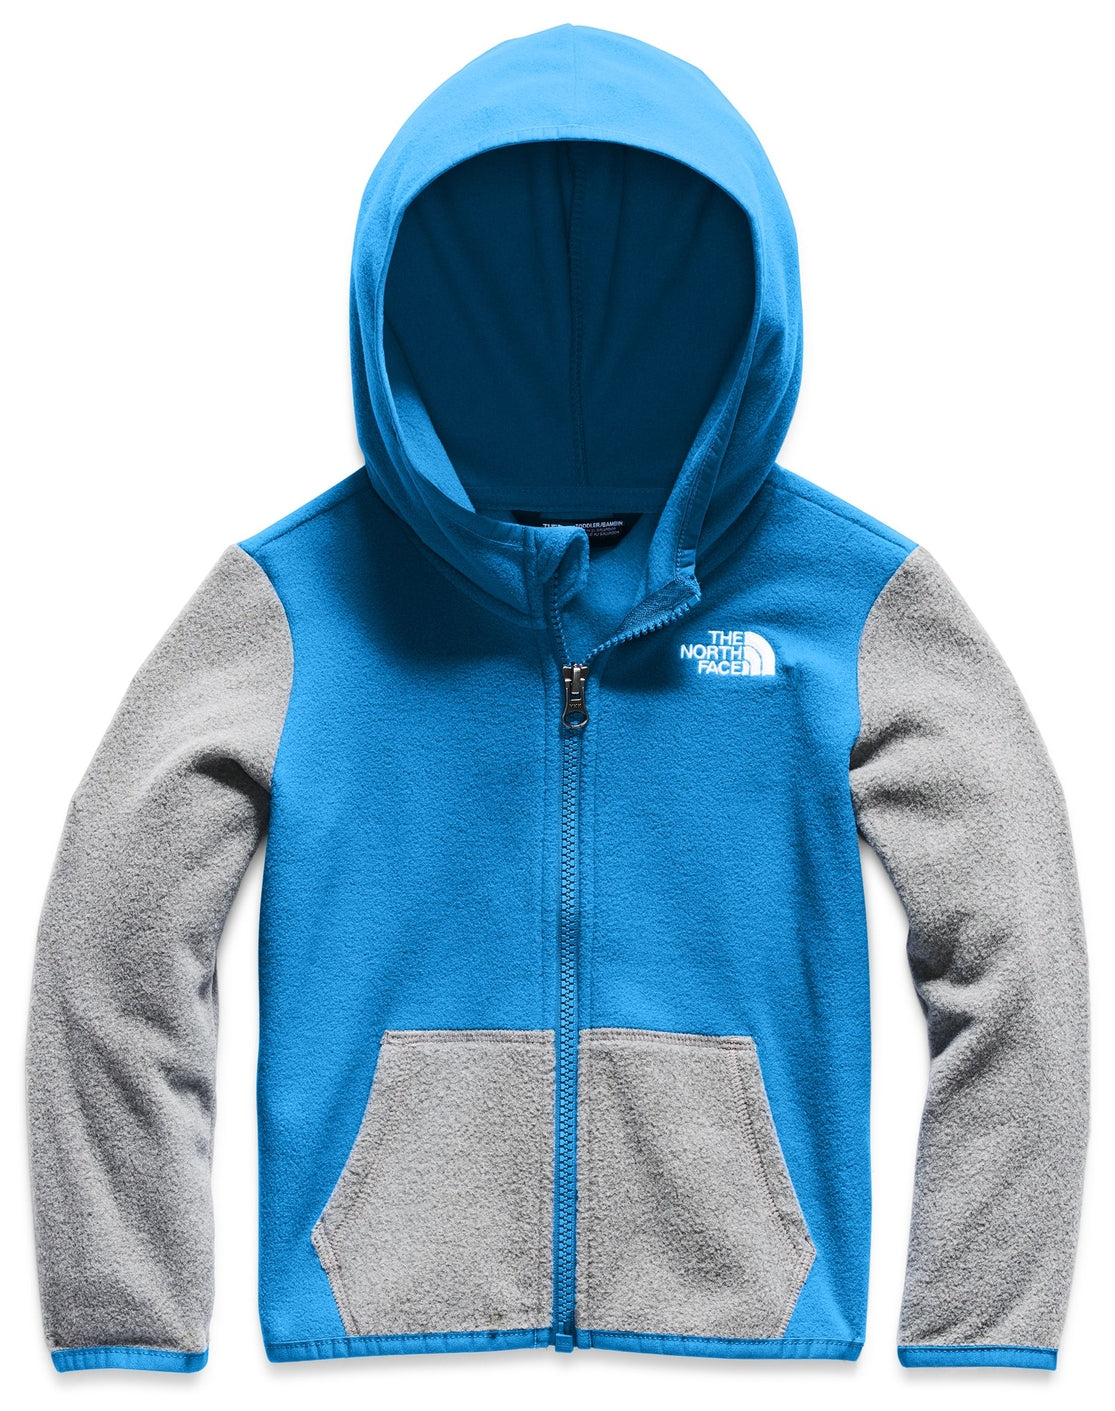 The North Face Toddler Glacier Full Zip 